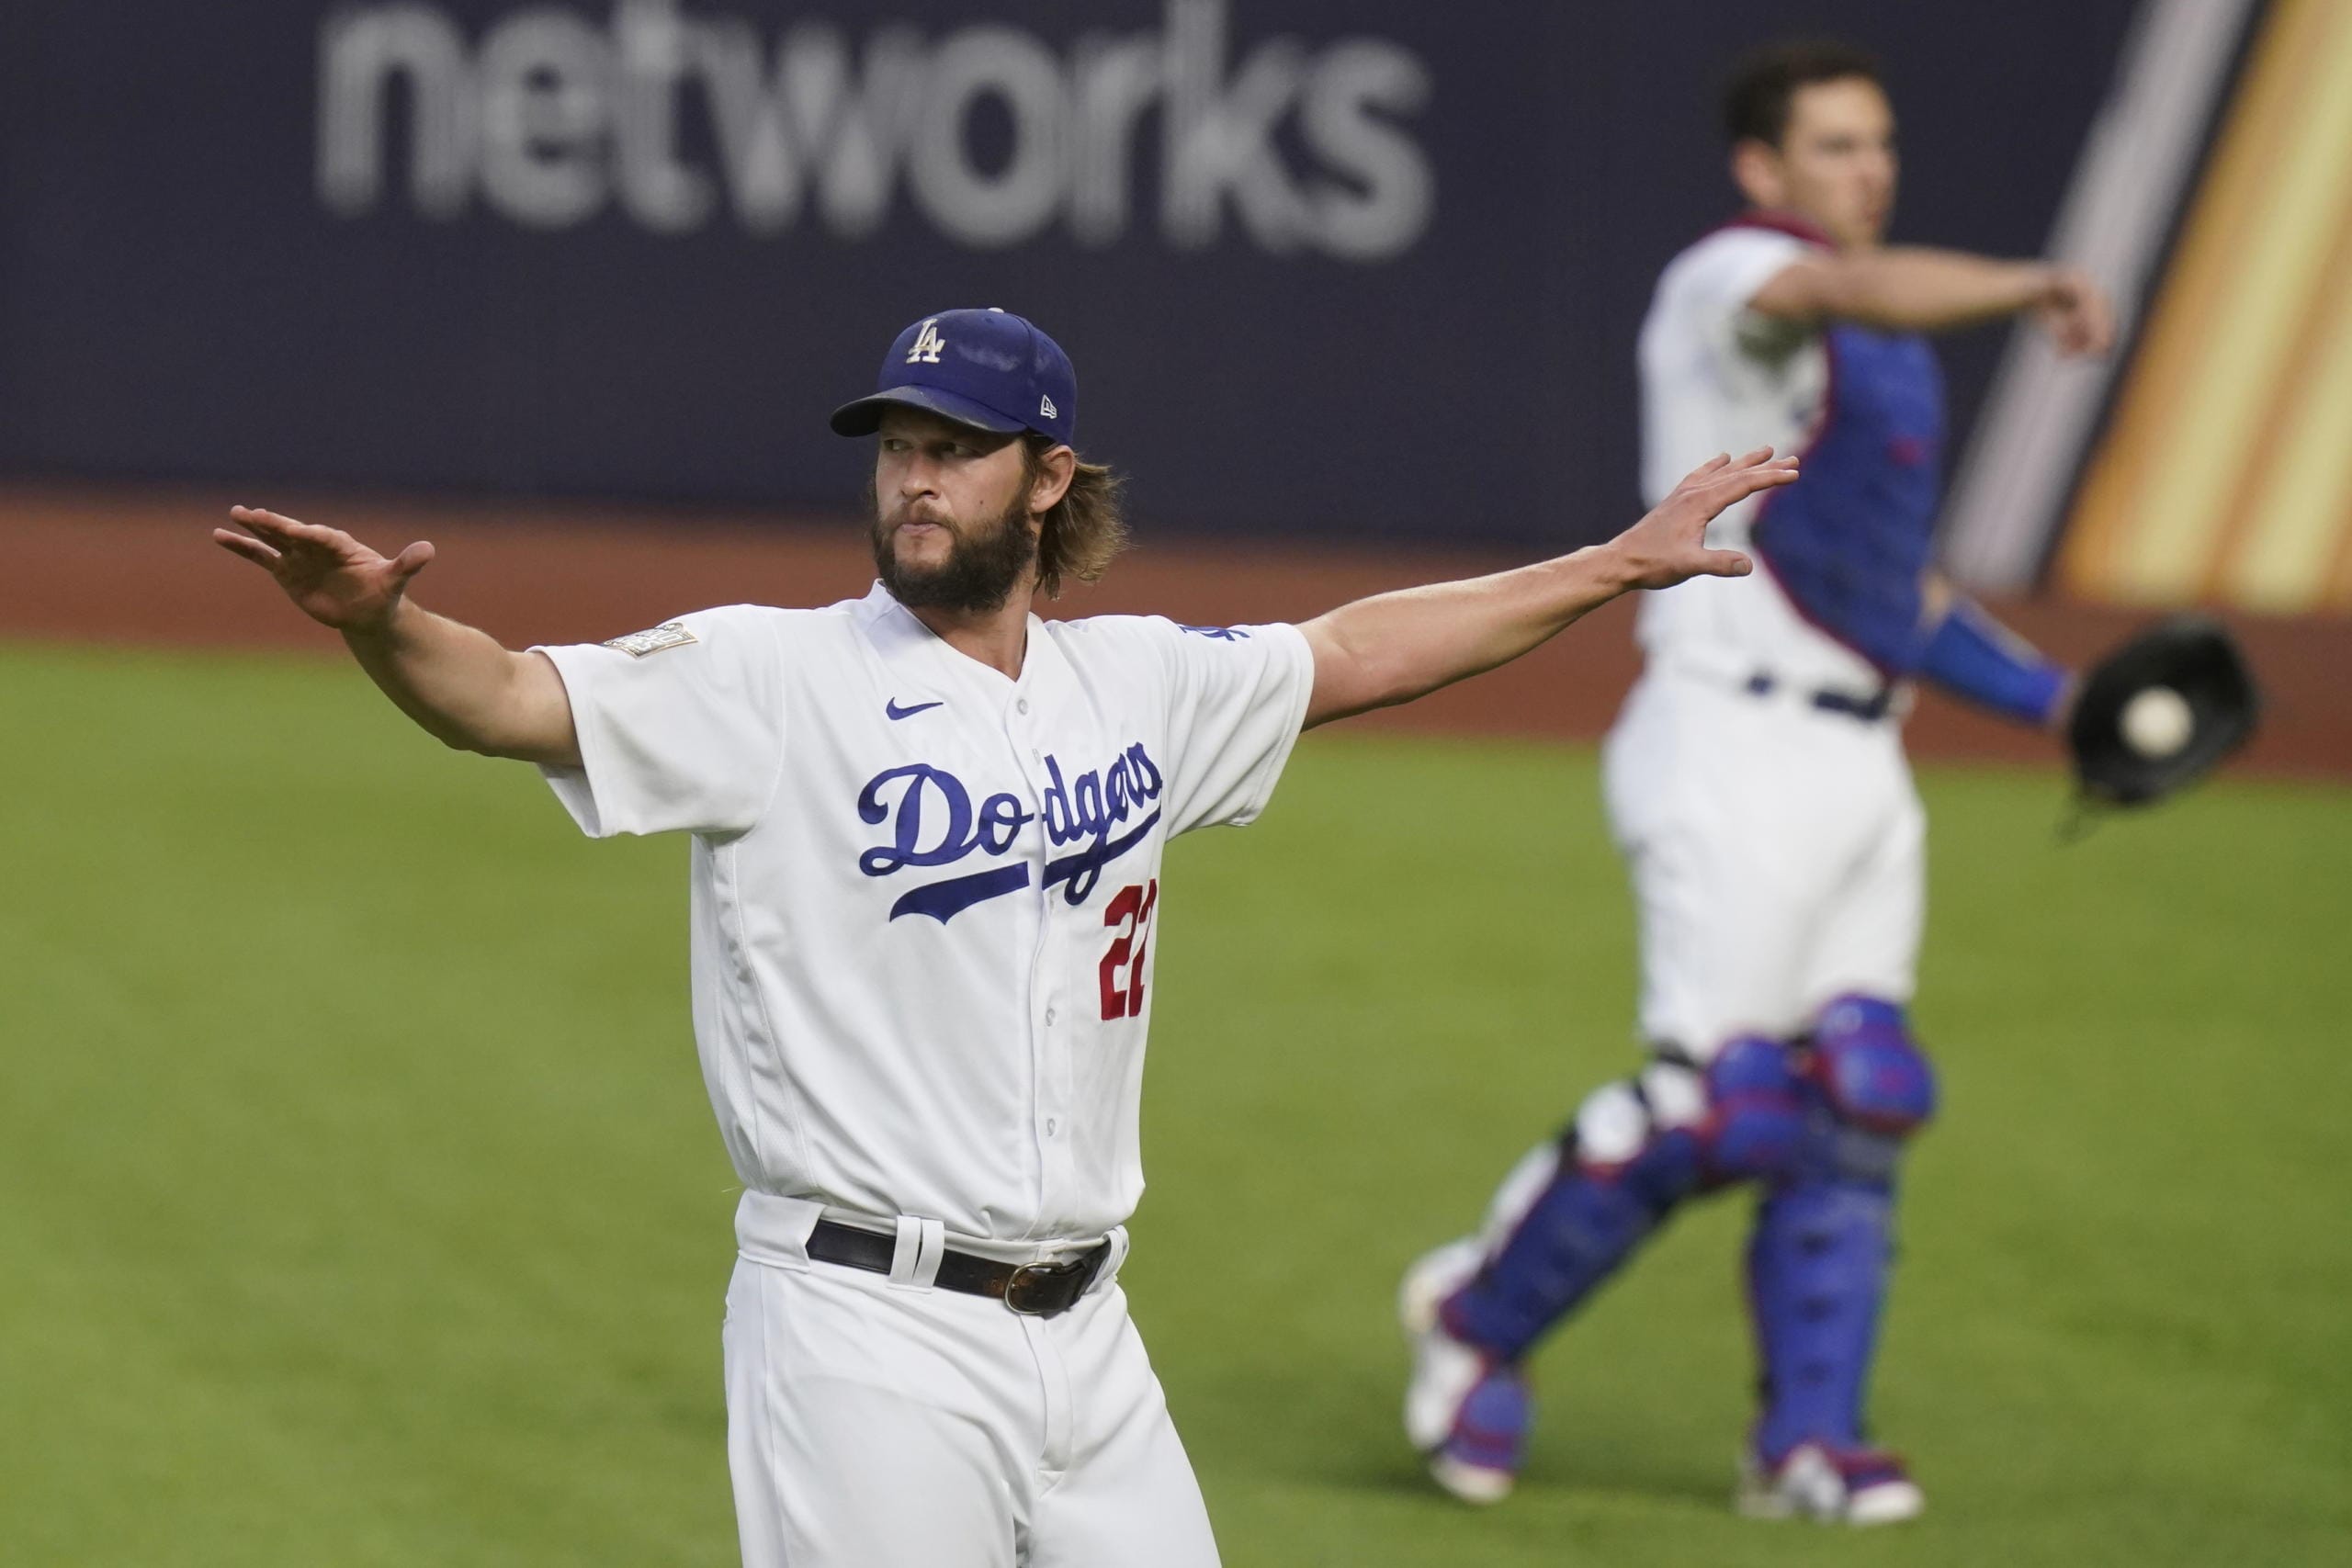 Dodgers beat Rays in Game 1 of World Series, 8-3 - The Columbian